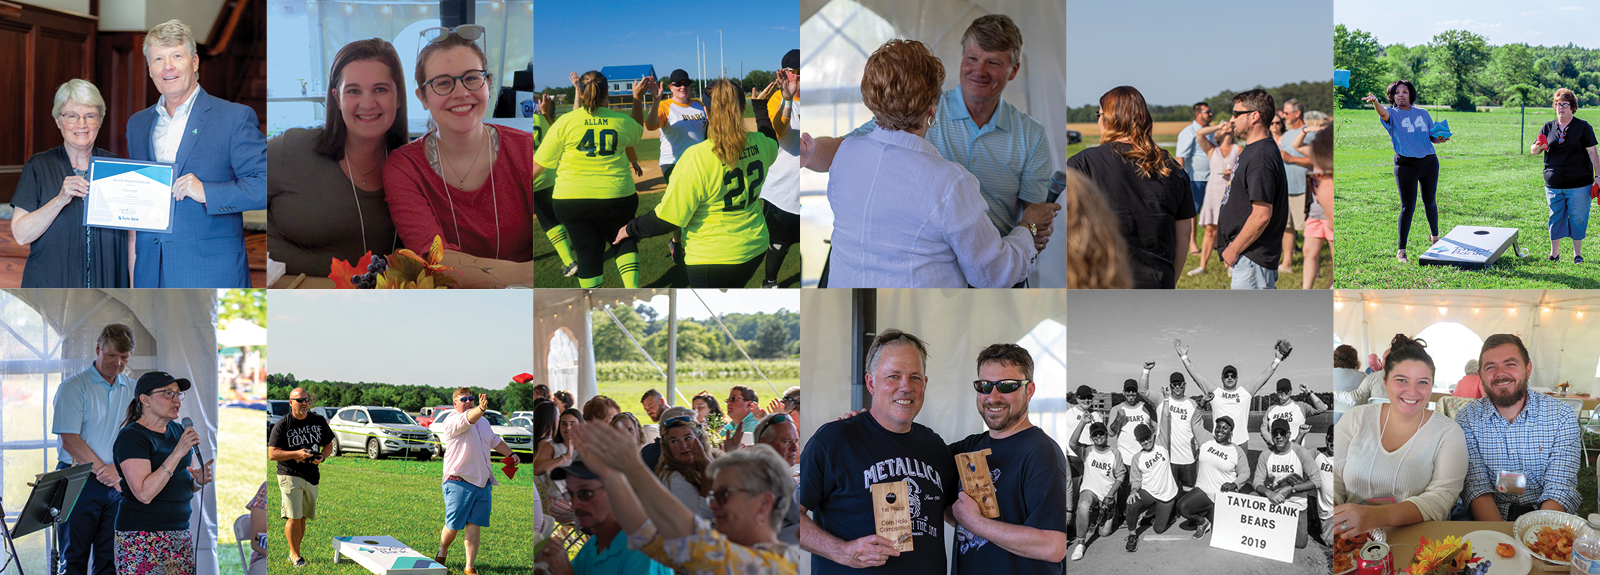 Collage of snapshots from recent Taylor Bank employee events.